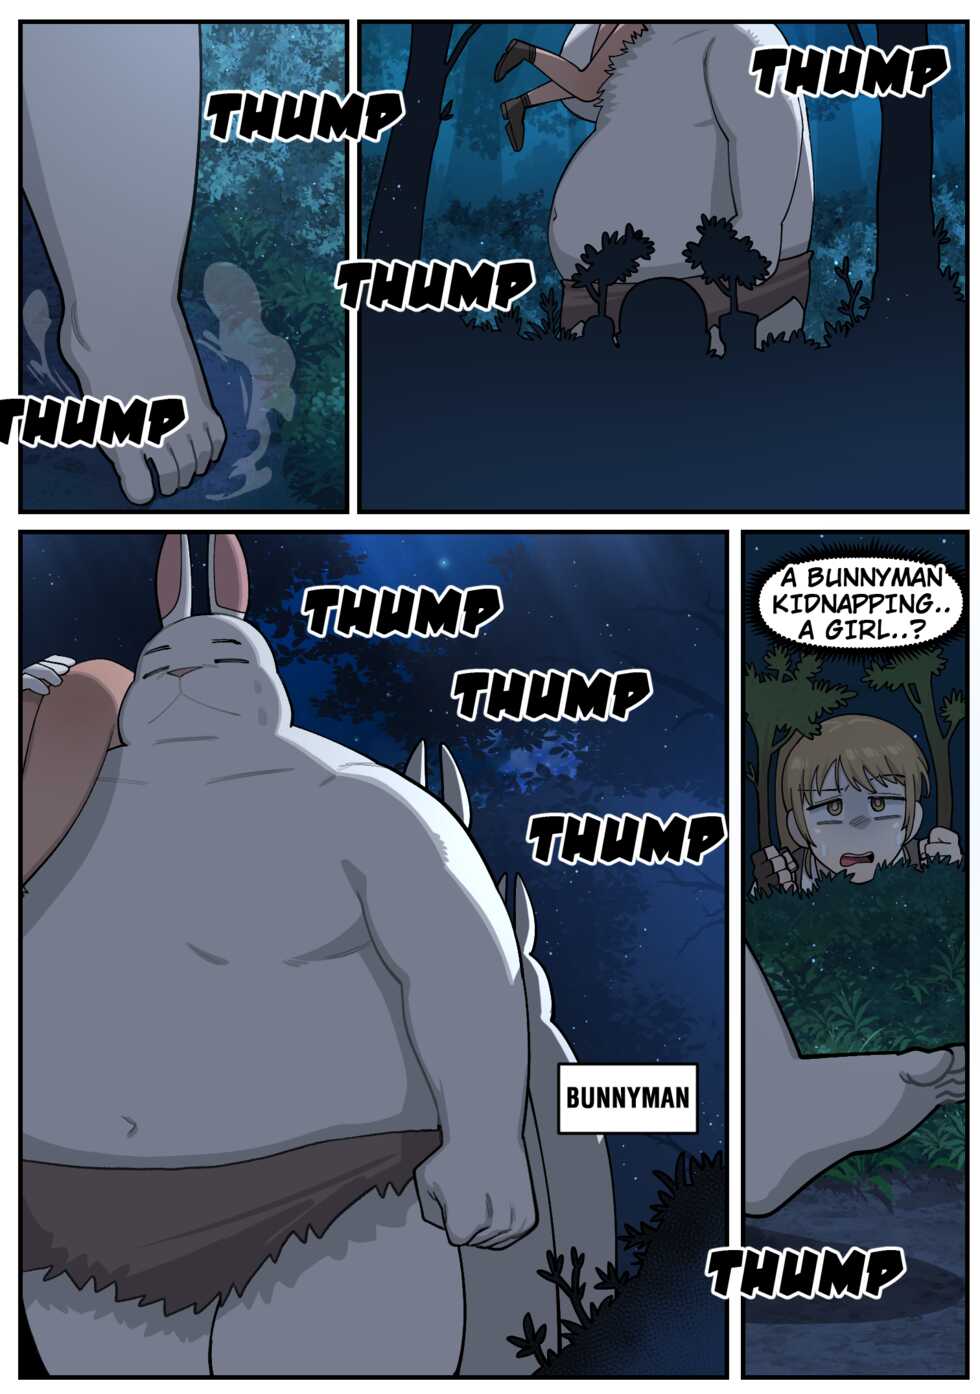 [6no1] Bunnyman Hunting Mission Part 1 (22.06) [English] [Uncensored] - Page 4